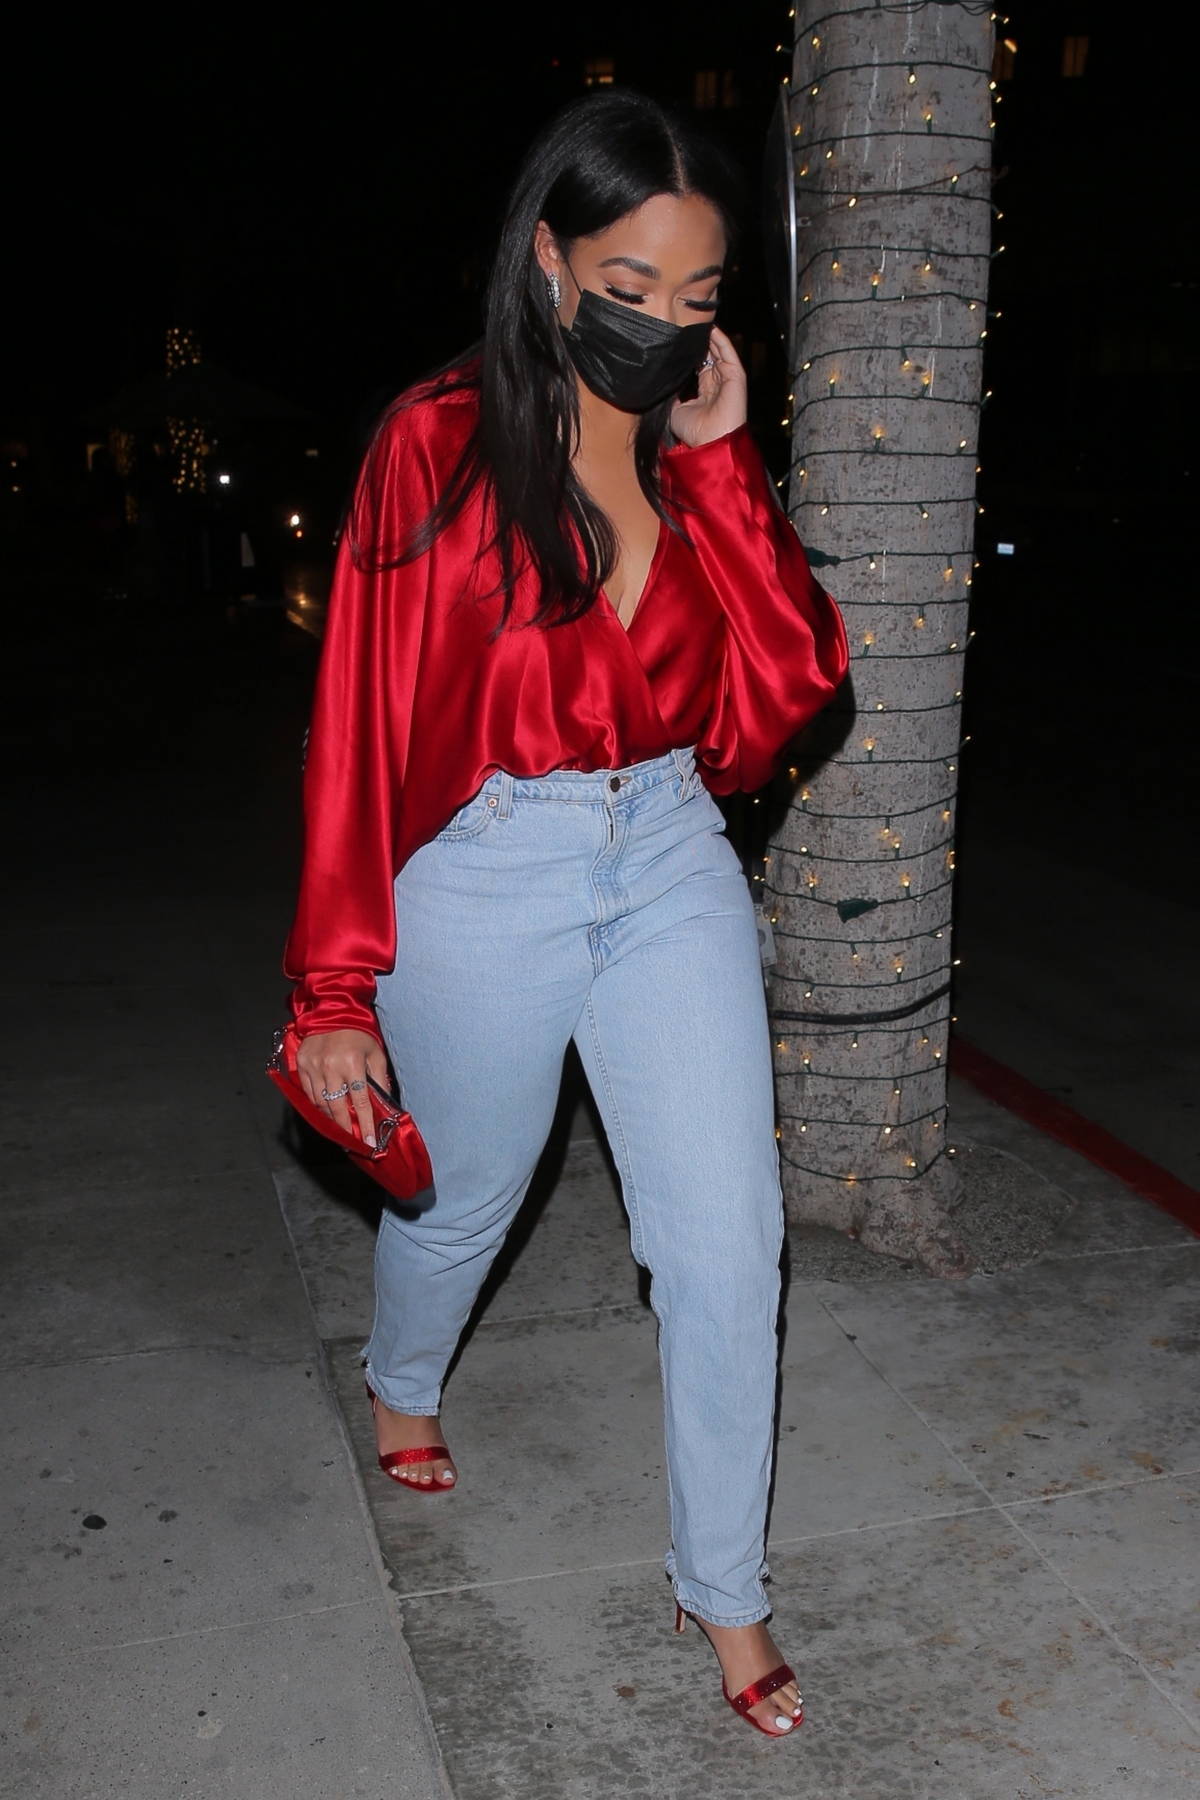 jordyn woods cuts a casual figure rocks a silk red top with jeans